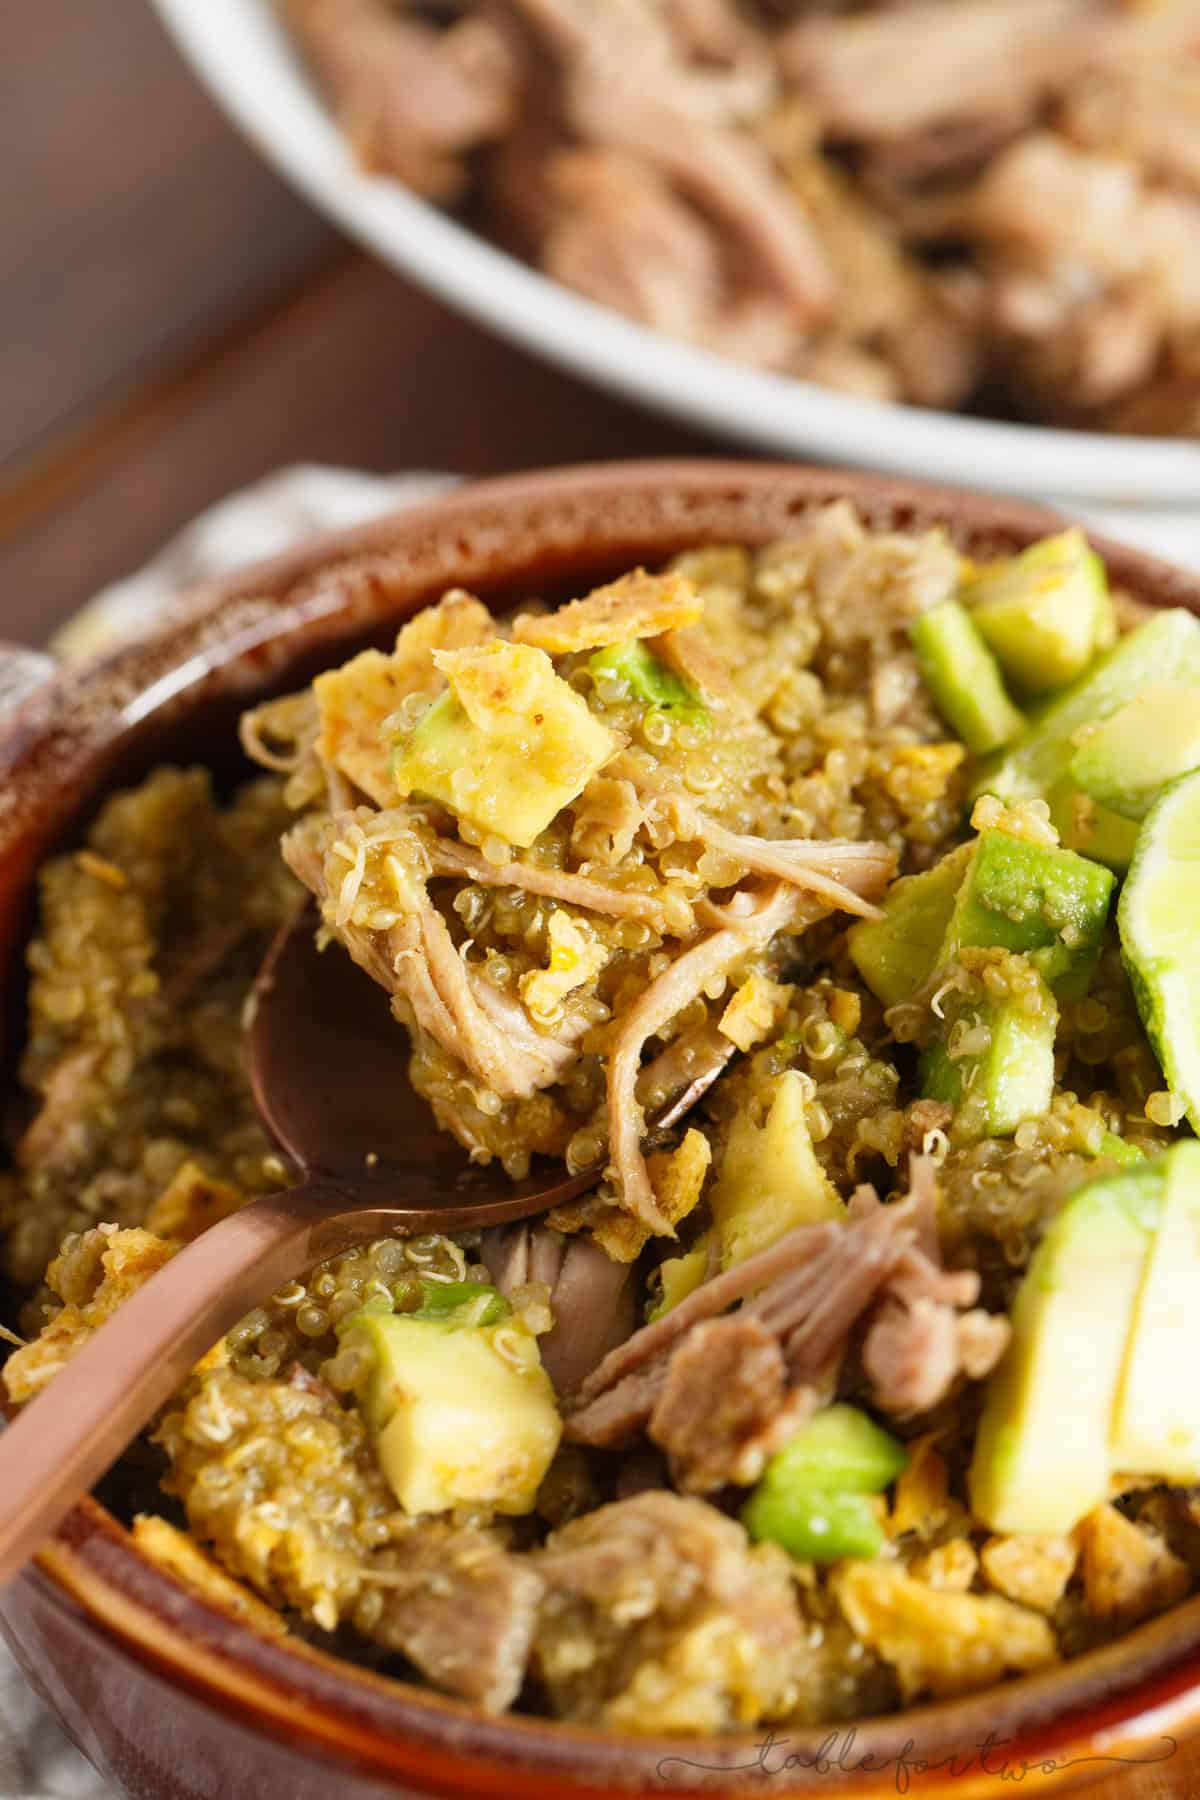 A low-effort weeknight meal with lots of flavor! Slow cooker poblano and tomatillo shredded pork and quinoa is a dish your family will love! The leftovers taste even better after the flavors meld even more! This can even be made in your pressure cooker!